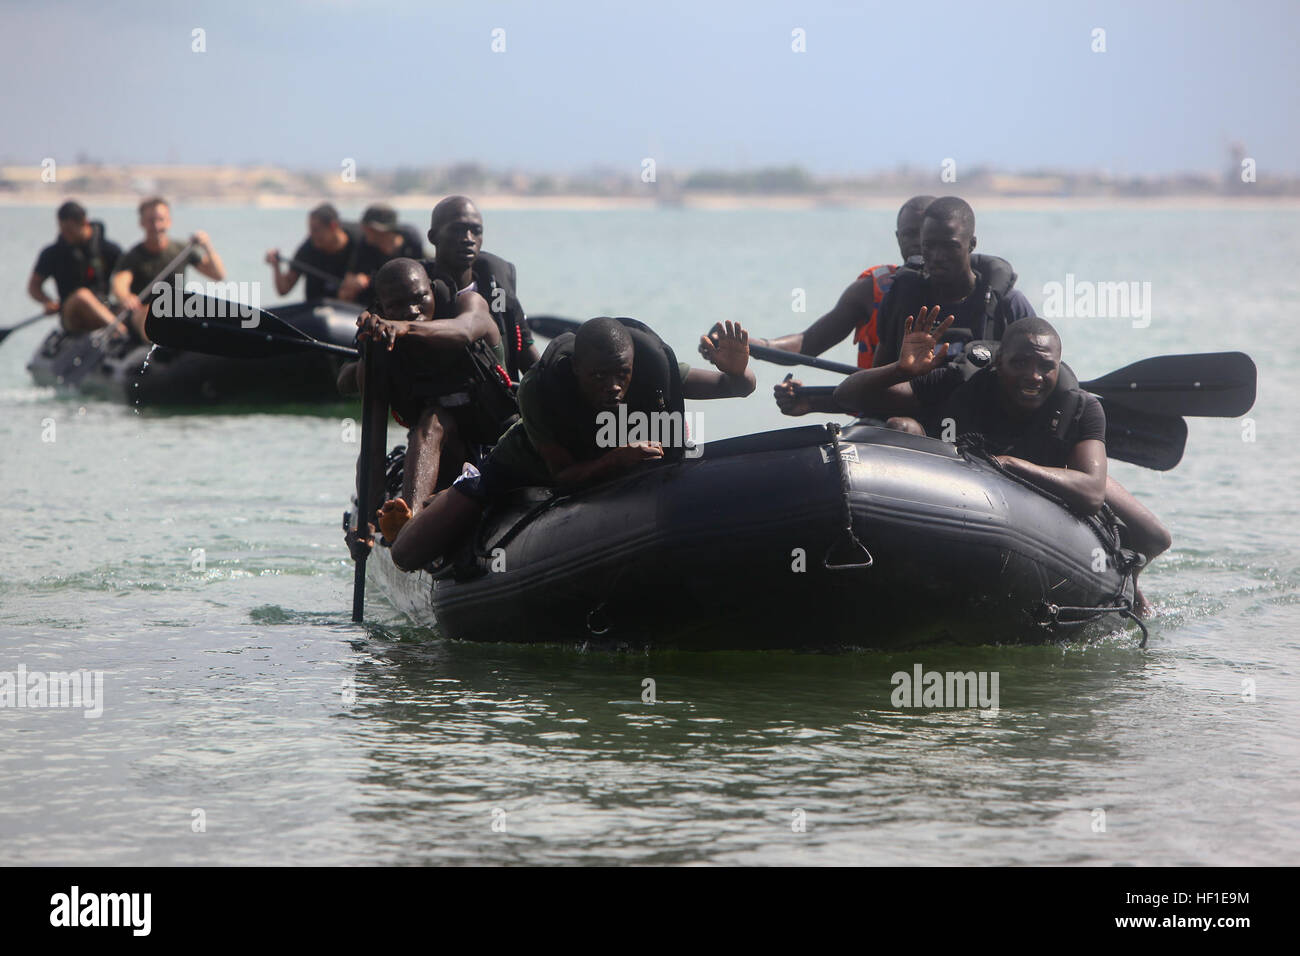 Senegalese Companie de Fusilier Marine Commandos apply basic boating skills taught by Marines and sailors of Special-Purpose Marine Air-Ground Task Force 13 on Bel Air Naval Base in Dakar, Senegal, Aug. 13, 2013. Special-Purpose MAGTF Africa strengthens U.S. Marine Corps Forces Africa and U.S. Africa Command's ability to assist partner nations in theater security cooperation and military-to-military engagements. Special-Purpose MAGTF Africa's current iteration is the fourth rotation working with the Senegalese Forces. (U.S. Marine Corps photo by Cpl. Ryan Joyner/Released) Special-Purpose Marin Stock Photo